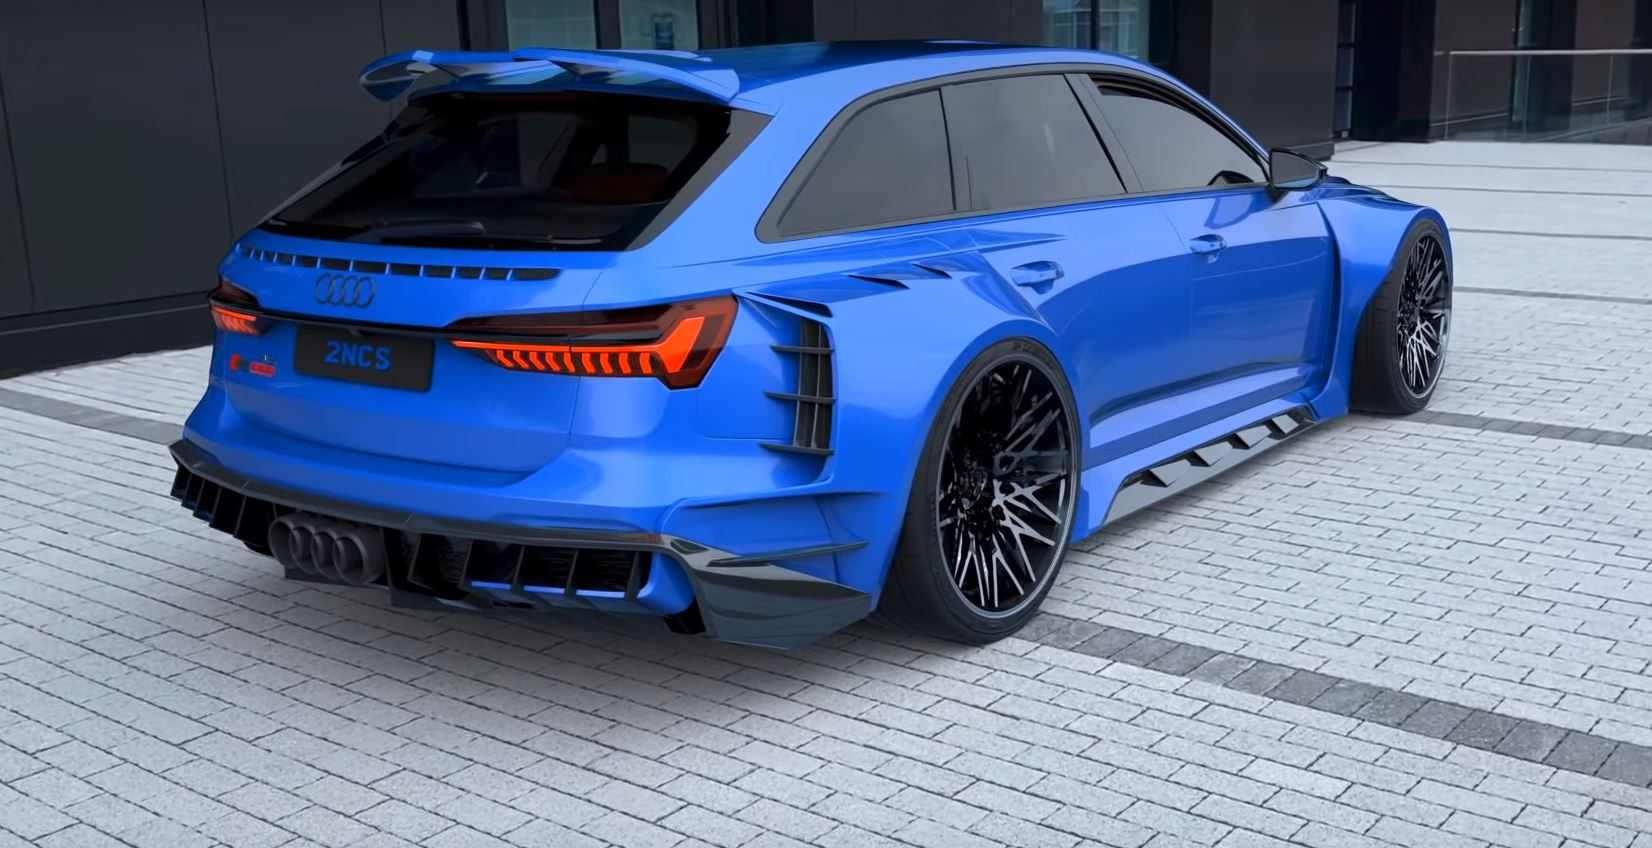 Insane 2020 Audi RS6 Widebody Rendering Looks Real, Has Four-Ring Exhaust -  autoevolution